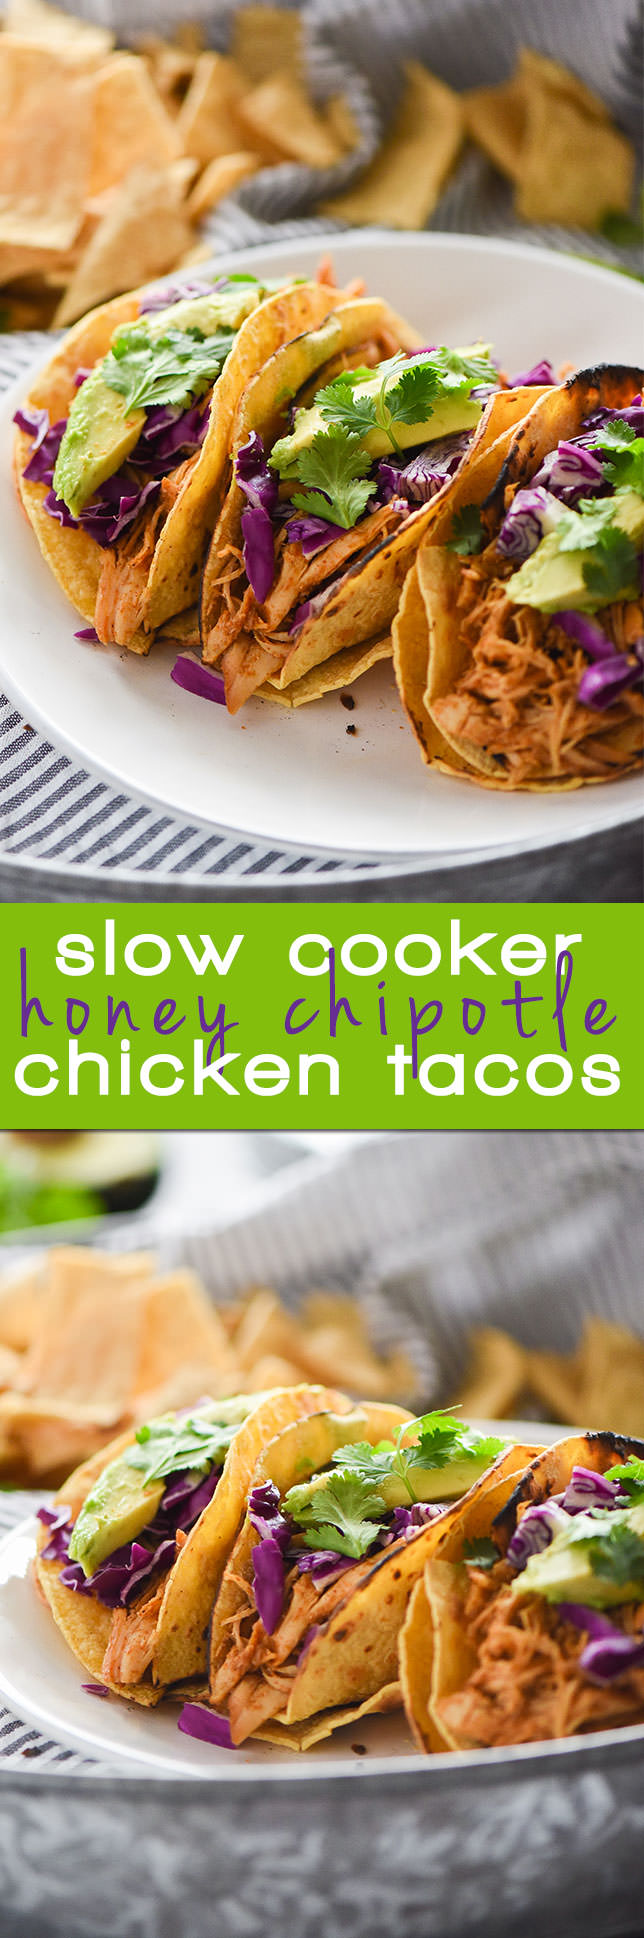 Best Slow Cooker Chicken Tacos | Healthy, Easy, Crockpot, Clean, Recipes, 21 Day Fix